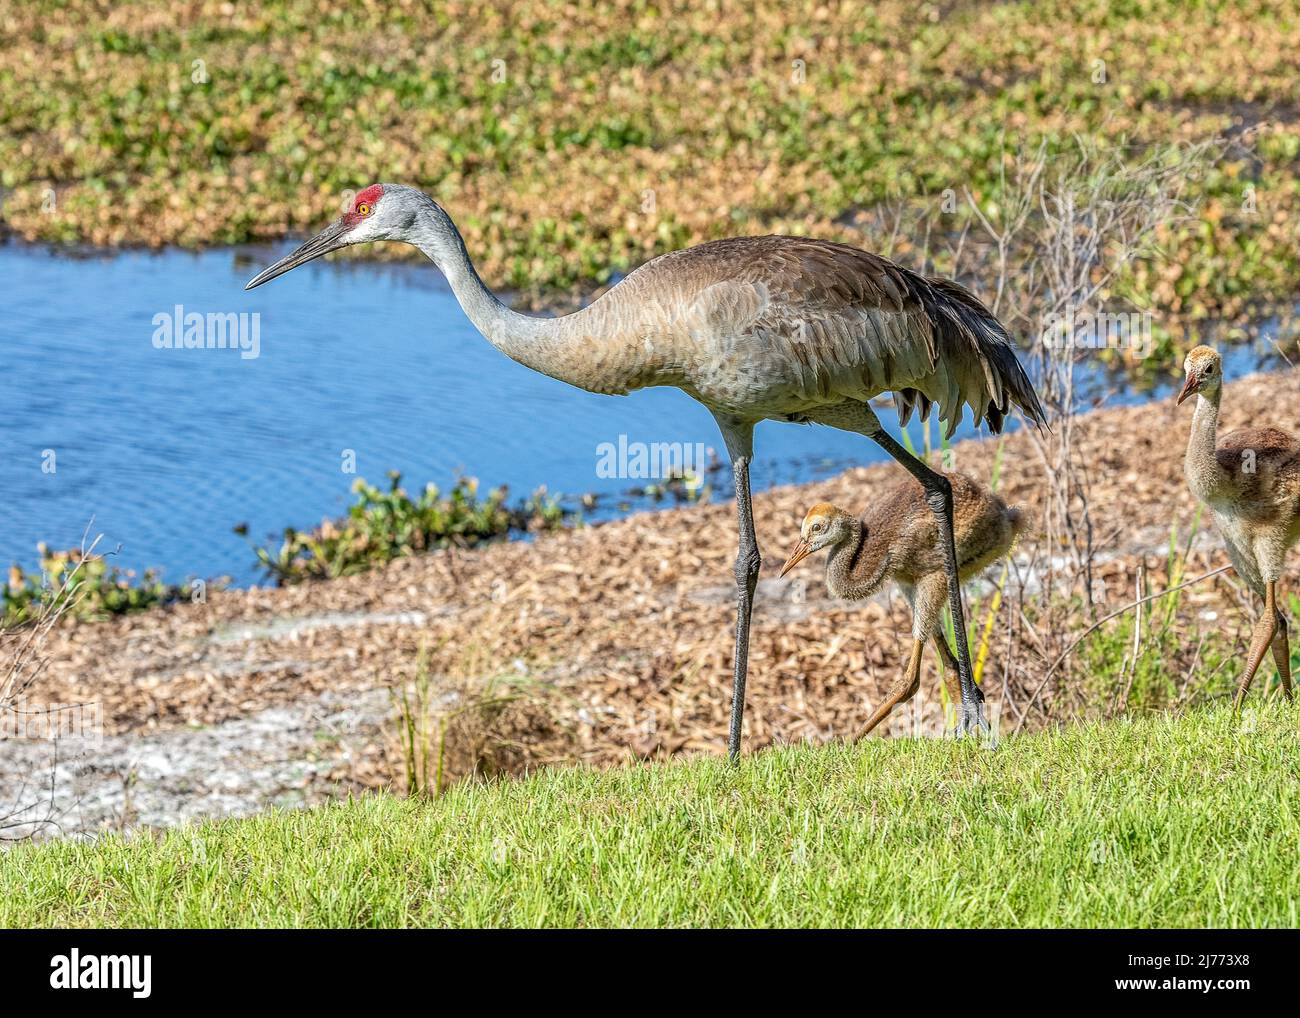 A family of Sandhill cranes at Sweetwater wetlands park in Gainesville Florida Stock Photo